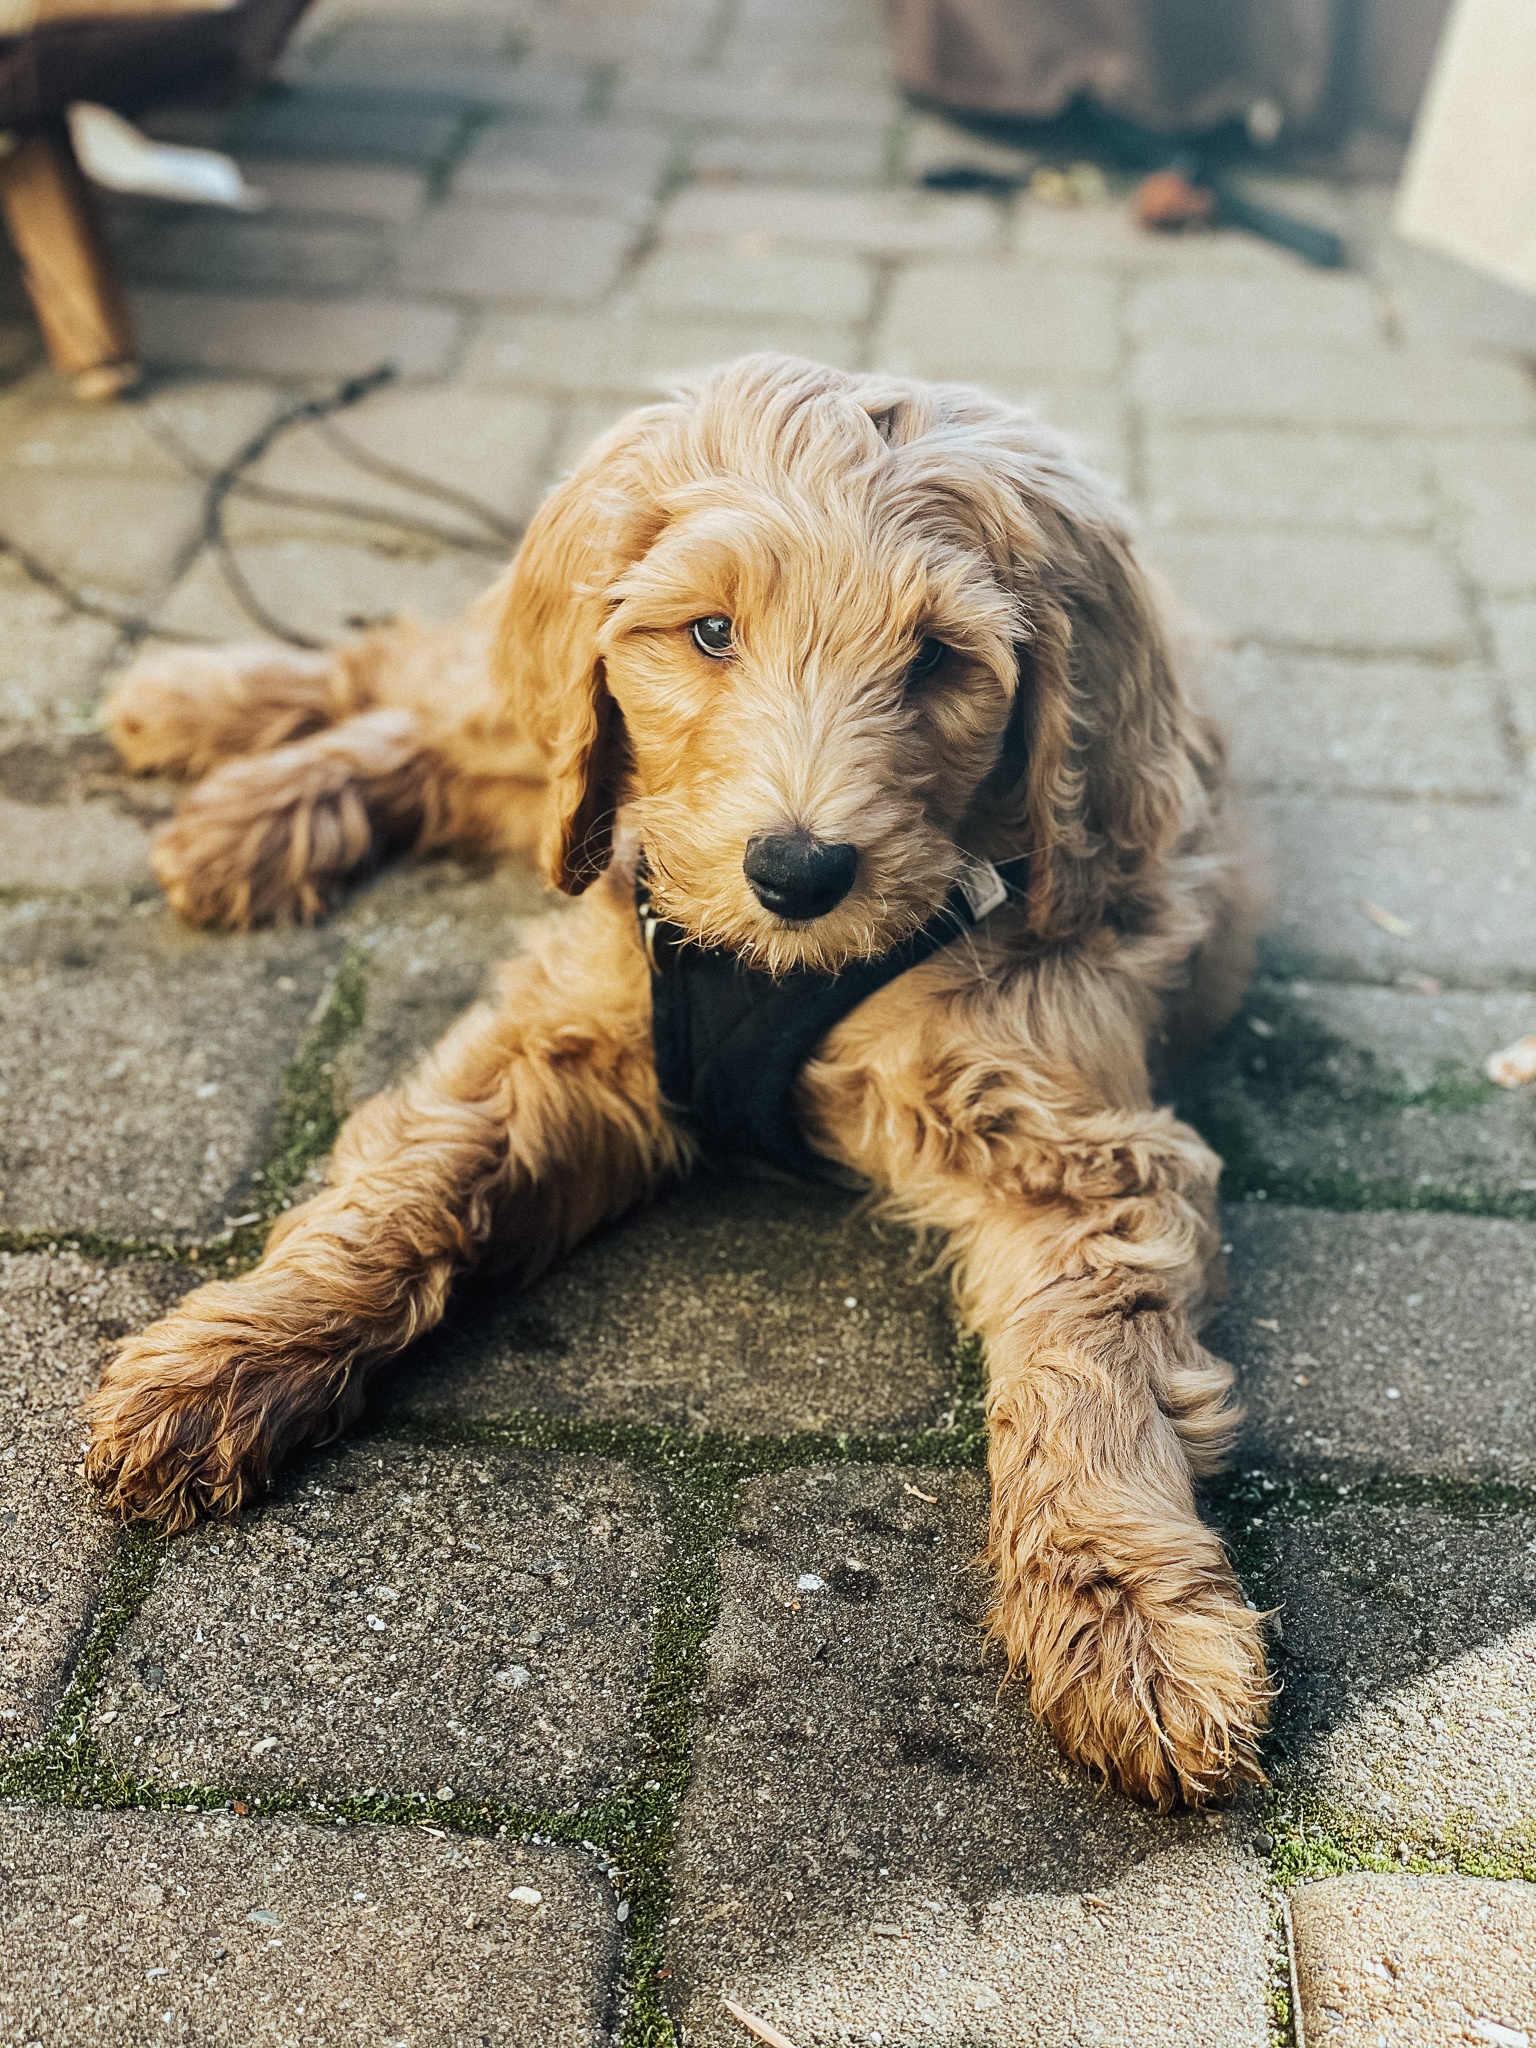 Got the puppy blues? The good news is you aren't alone. Check out these tips and tricks for surviving puppy parenthood.